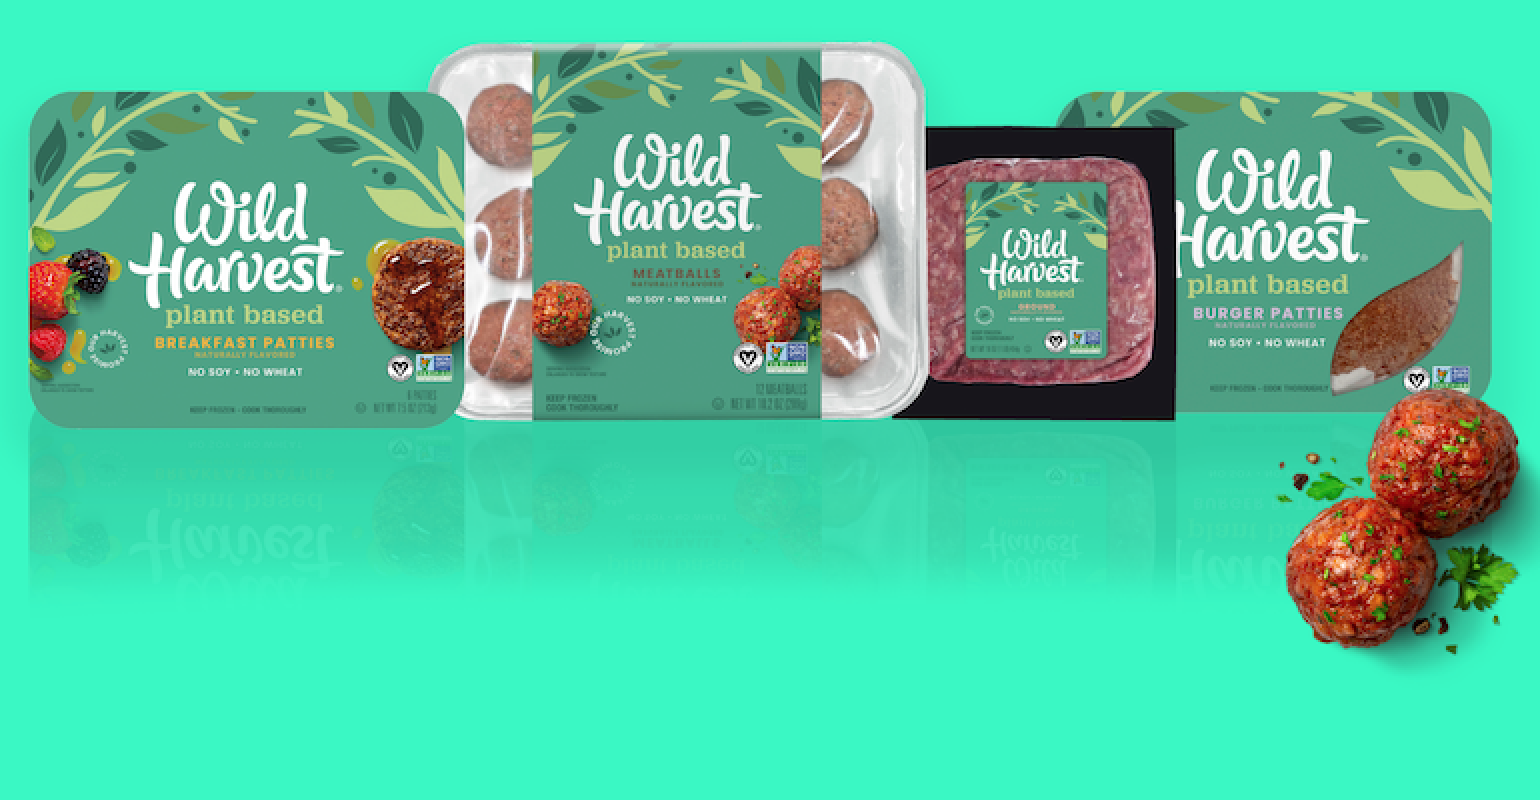 https://www.supermarketnews.com/sites/supermarketnews.com/files/styles/article_featured_retina/public/UNFI-Wild_Harvest_brand_refresh-plant_based_meat_products.png?itok=Xk1Xn_mB